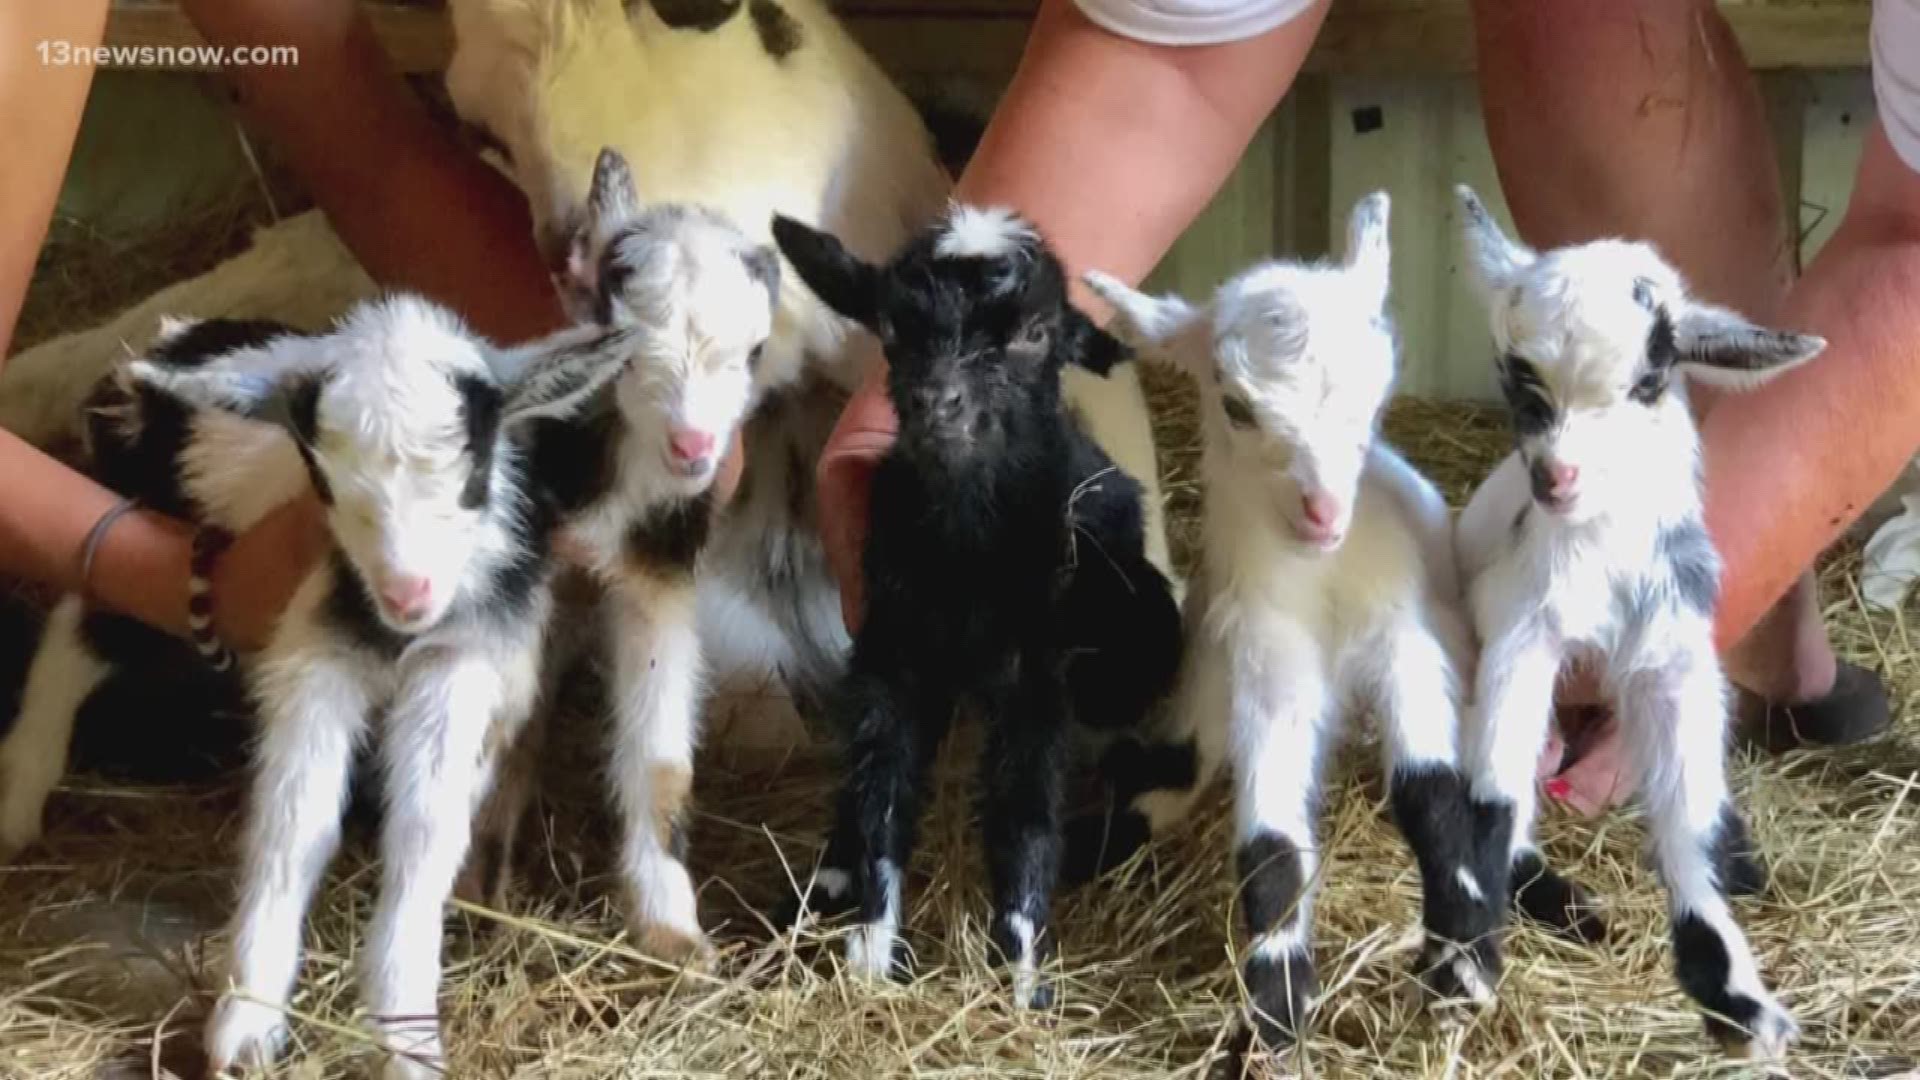 The odds for quintuplets for goats are one in 10,000. Tink, was six days past due when the baby goats arrived.